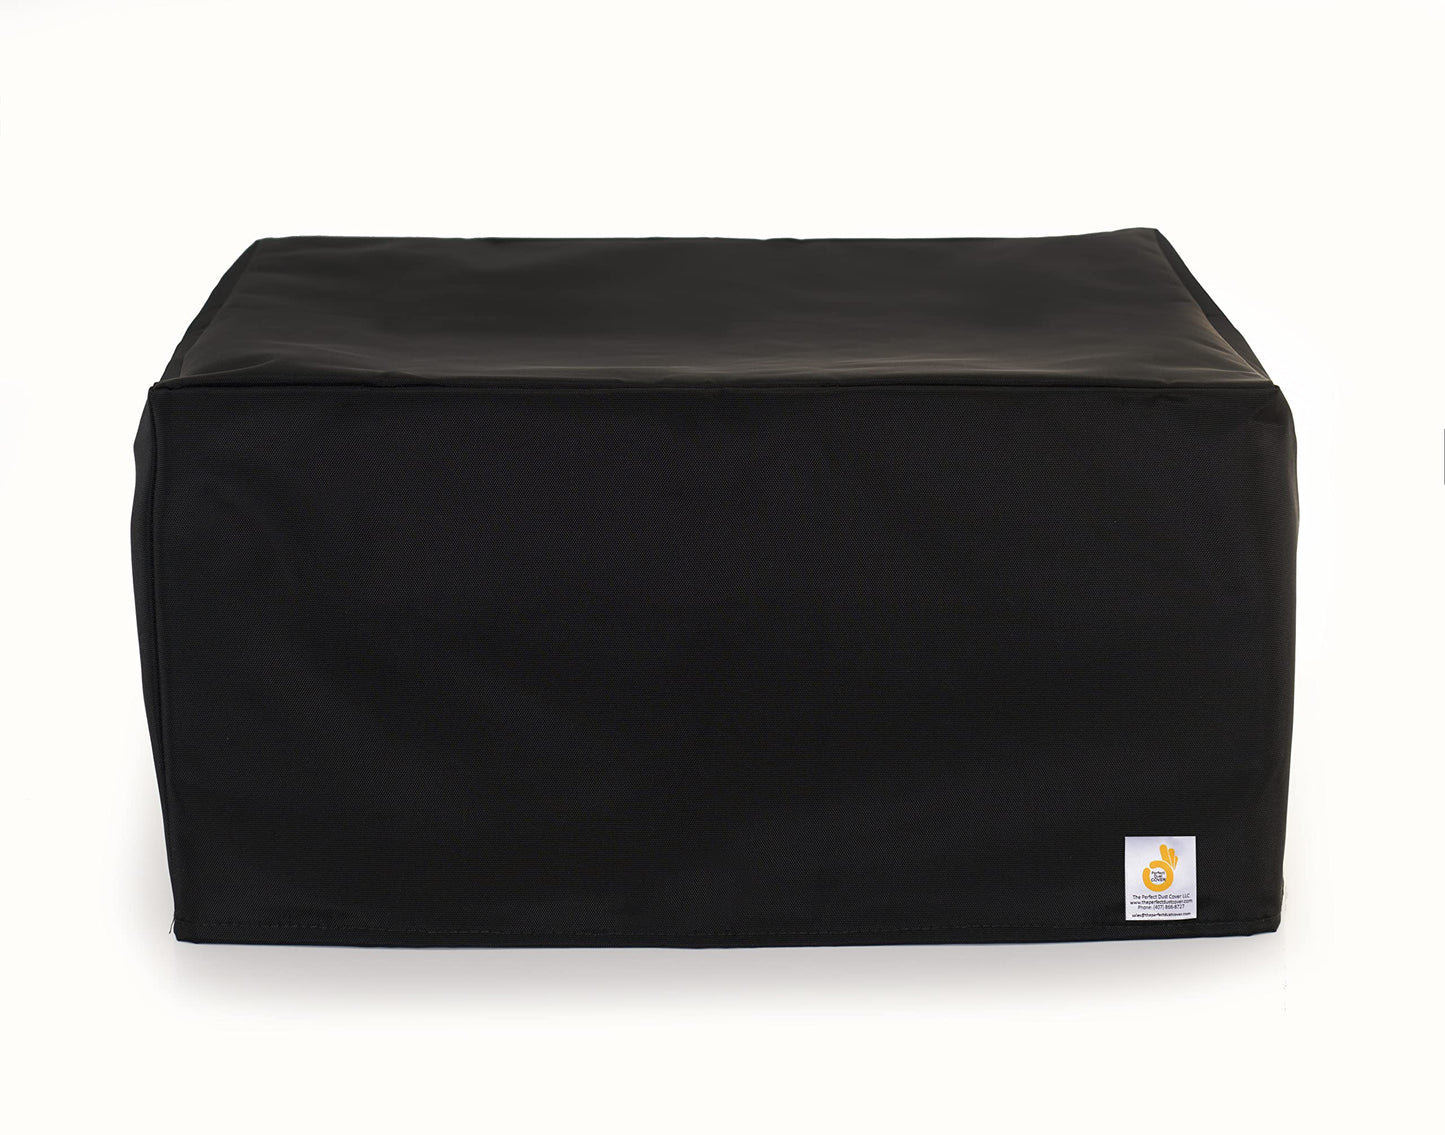 The Perfect Dust Cover, Black Nylon Cover for HP Laserjet Enterprise MFP M528f Multifunction Printer, Anti Static Waterproof and Double Stitched Cover by The Perfect Dust Cover LLC